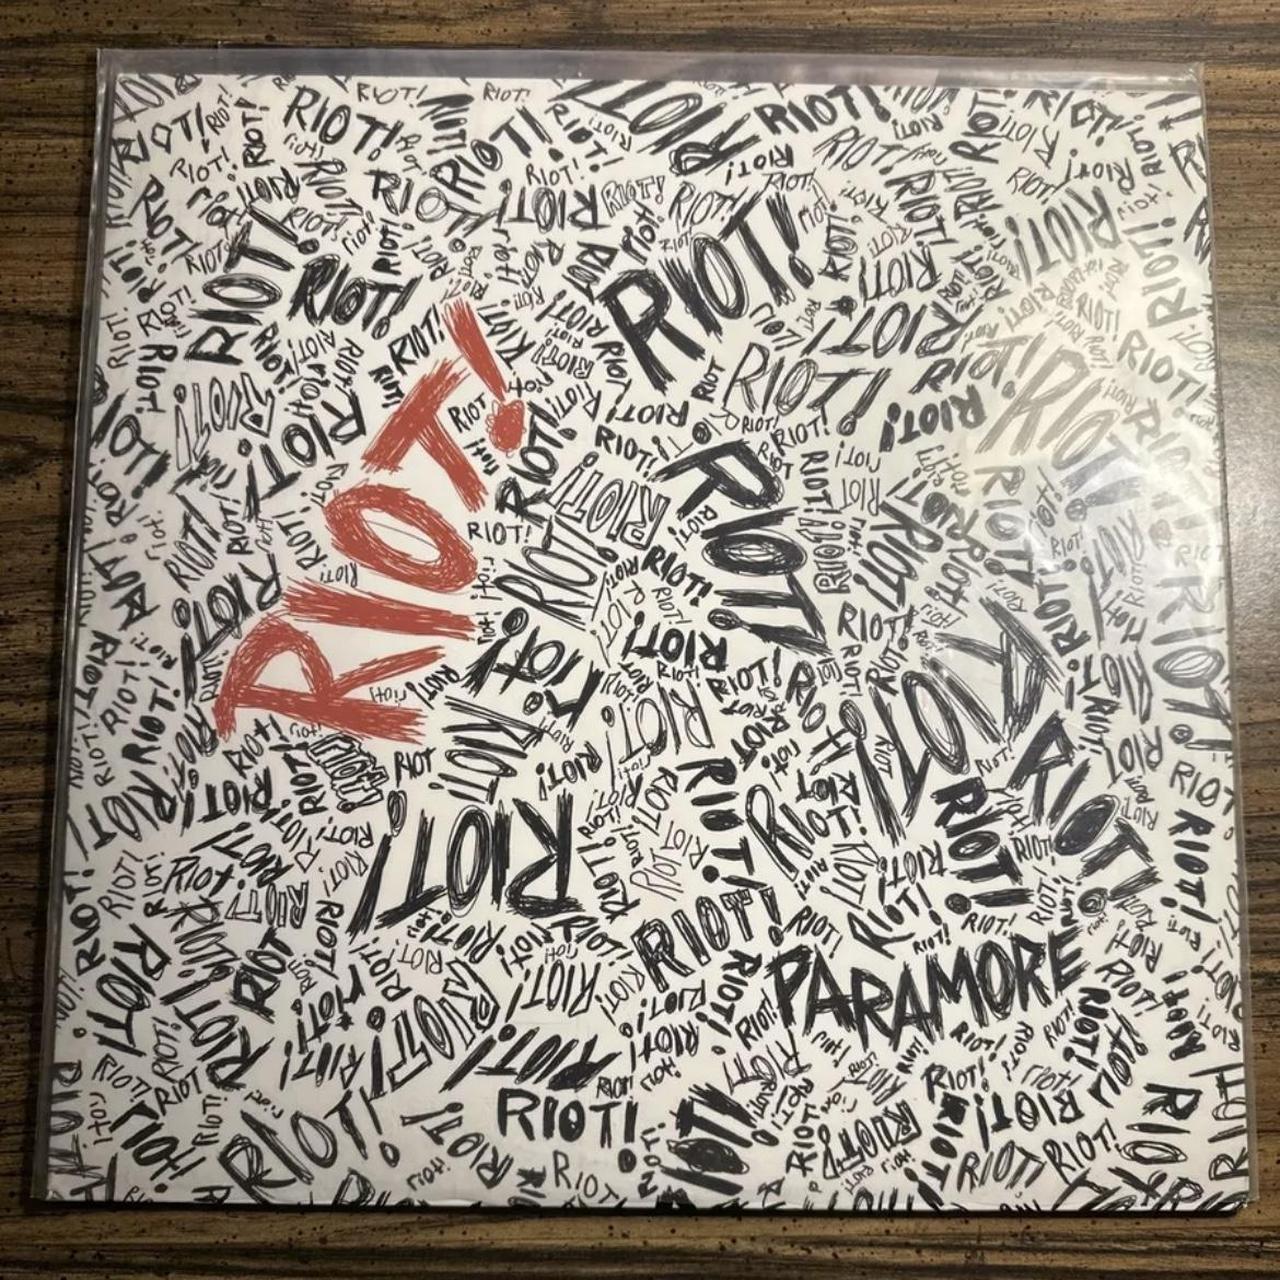 Two Paramore CDs! Riot and brand new eyes x - Depop